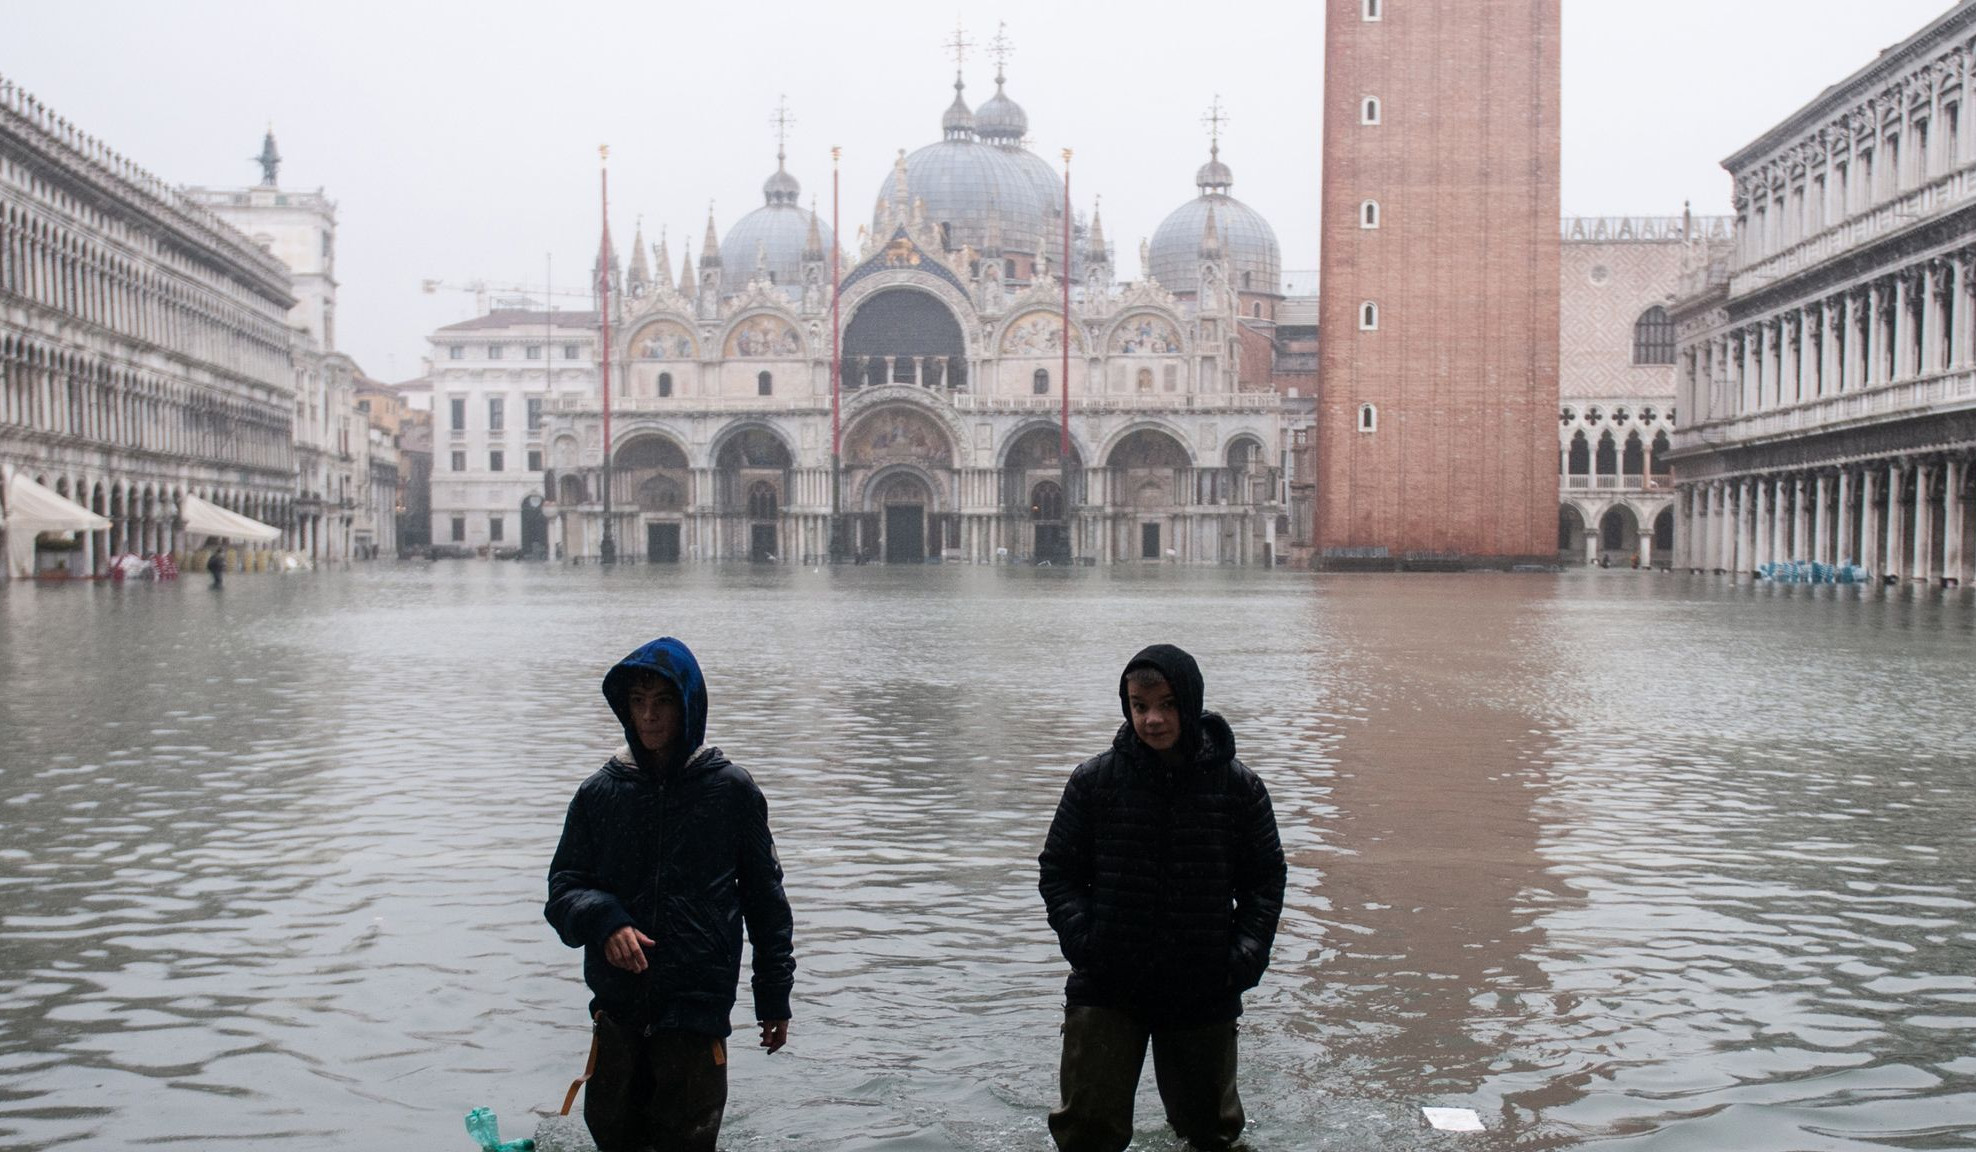 Out of season flood hits St. Mark's Square in Venice